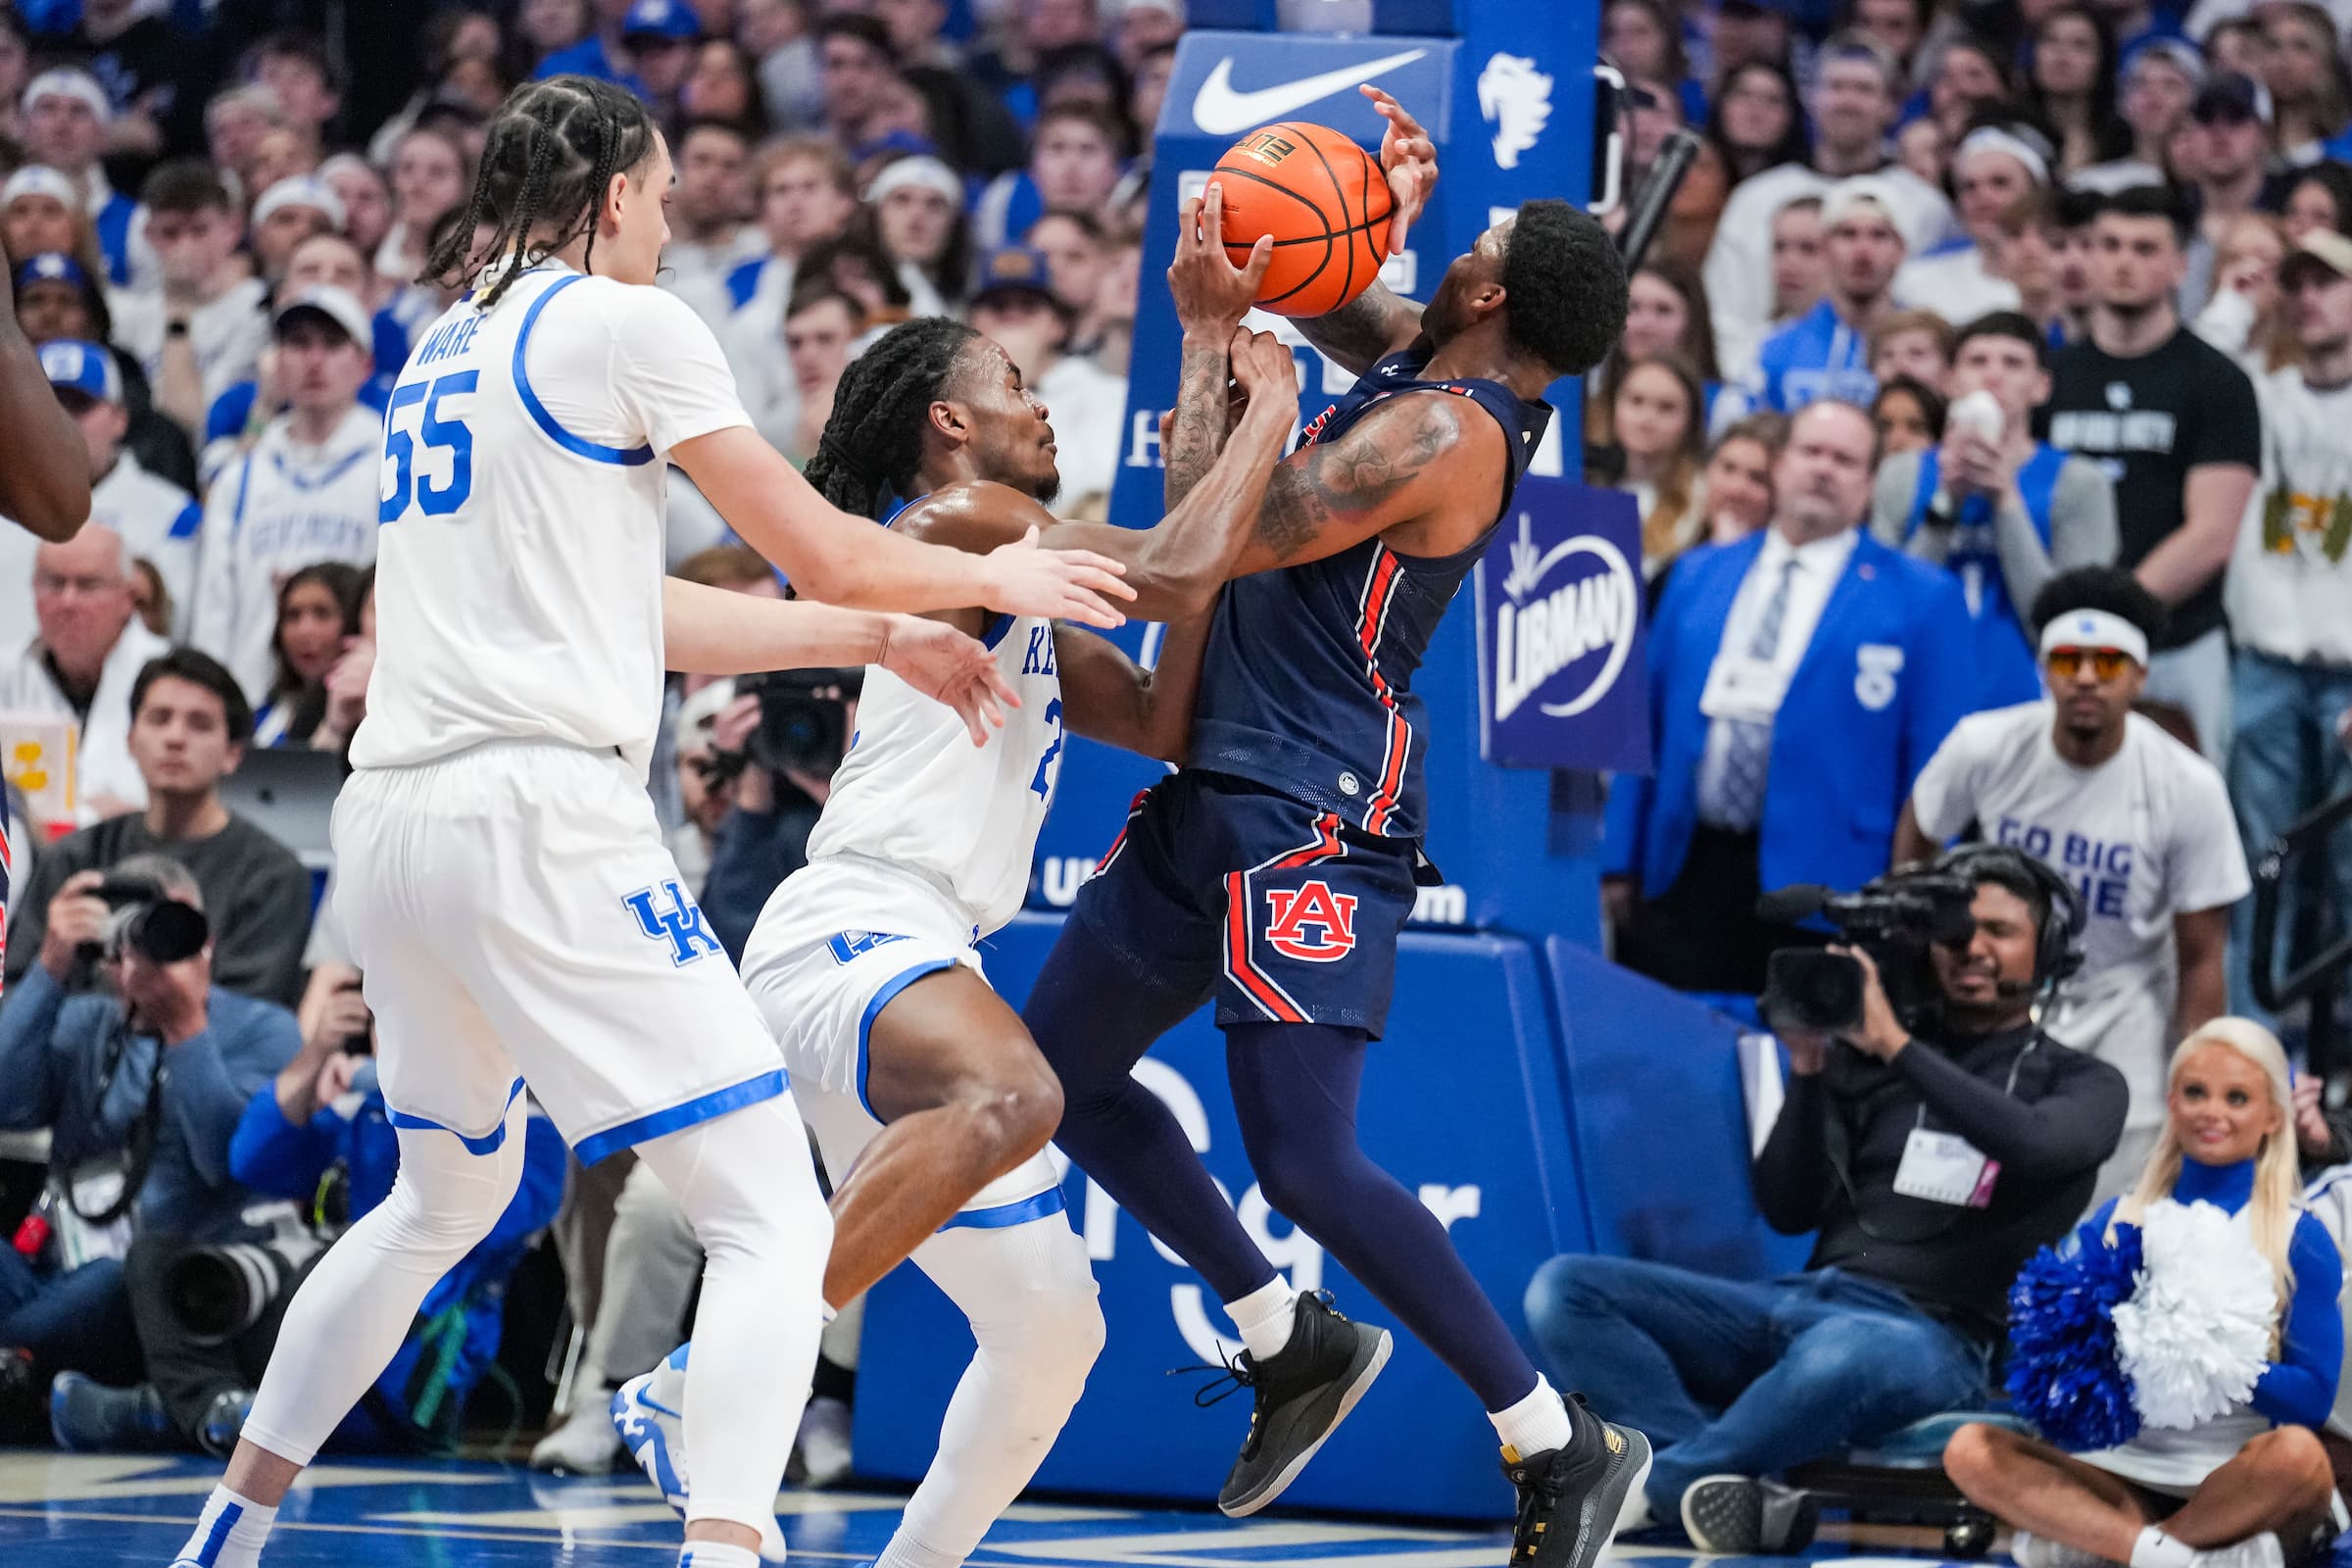 Febuary 25, 2023; Auburn, AL, USA; K.D. Johnson (0) during the game between the Auburn Tigers and the Kentucky Wildcats at Rupp Arena. Mandatory Credit: Steven Leonard/AU Athletics